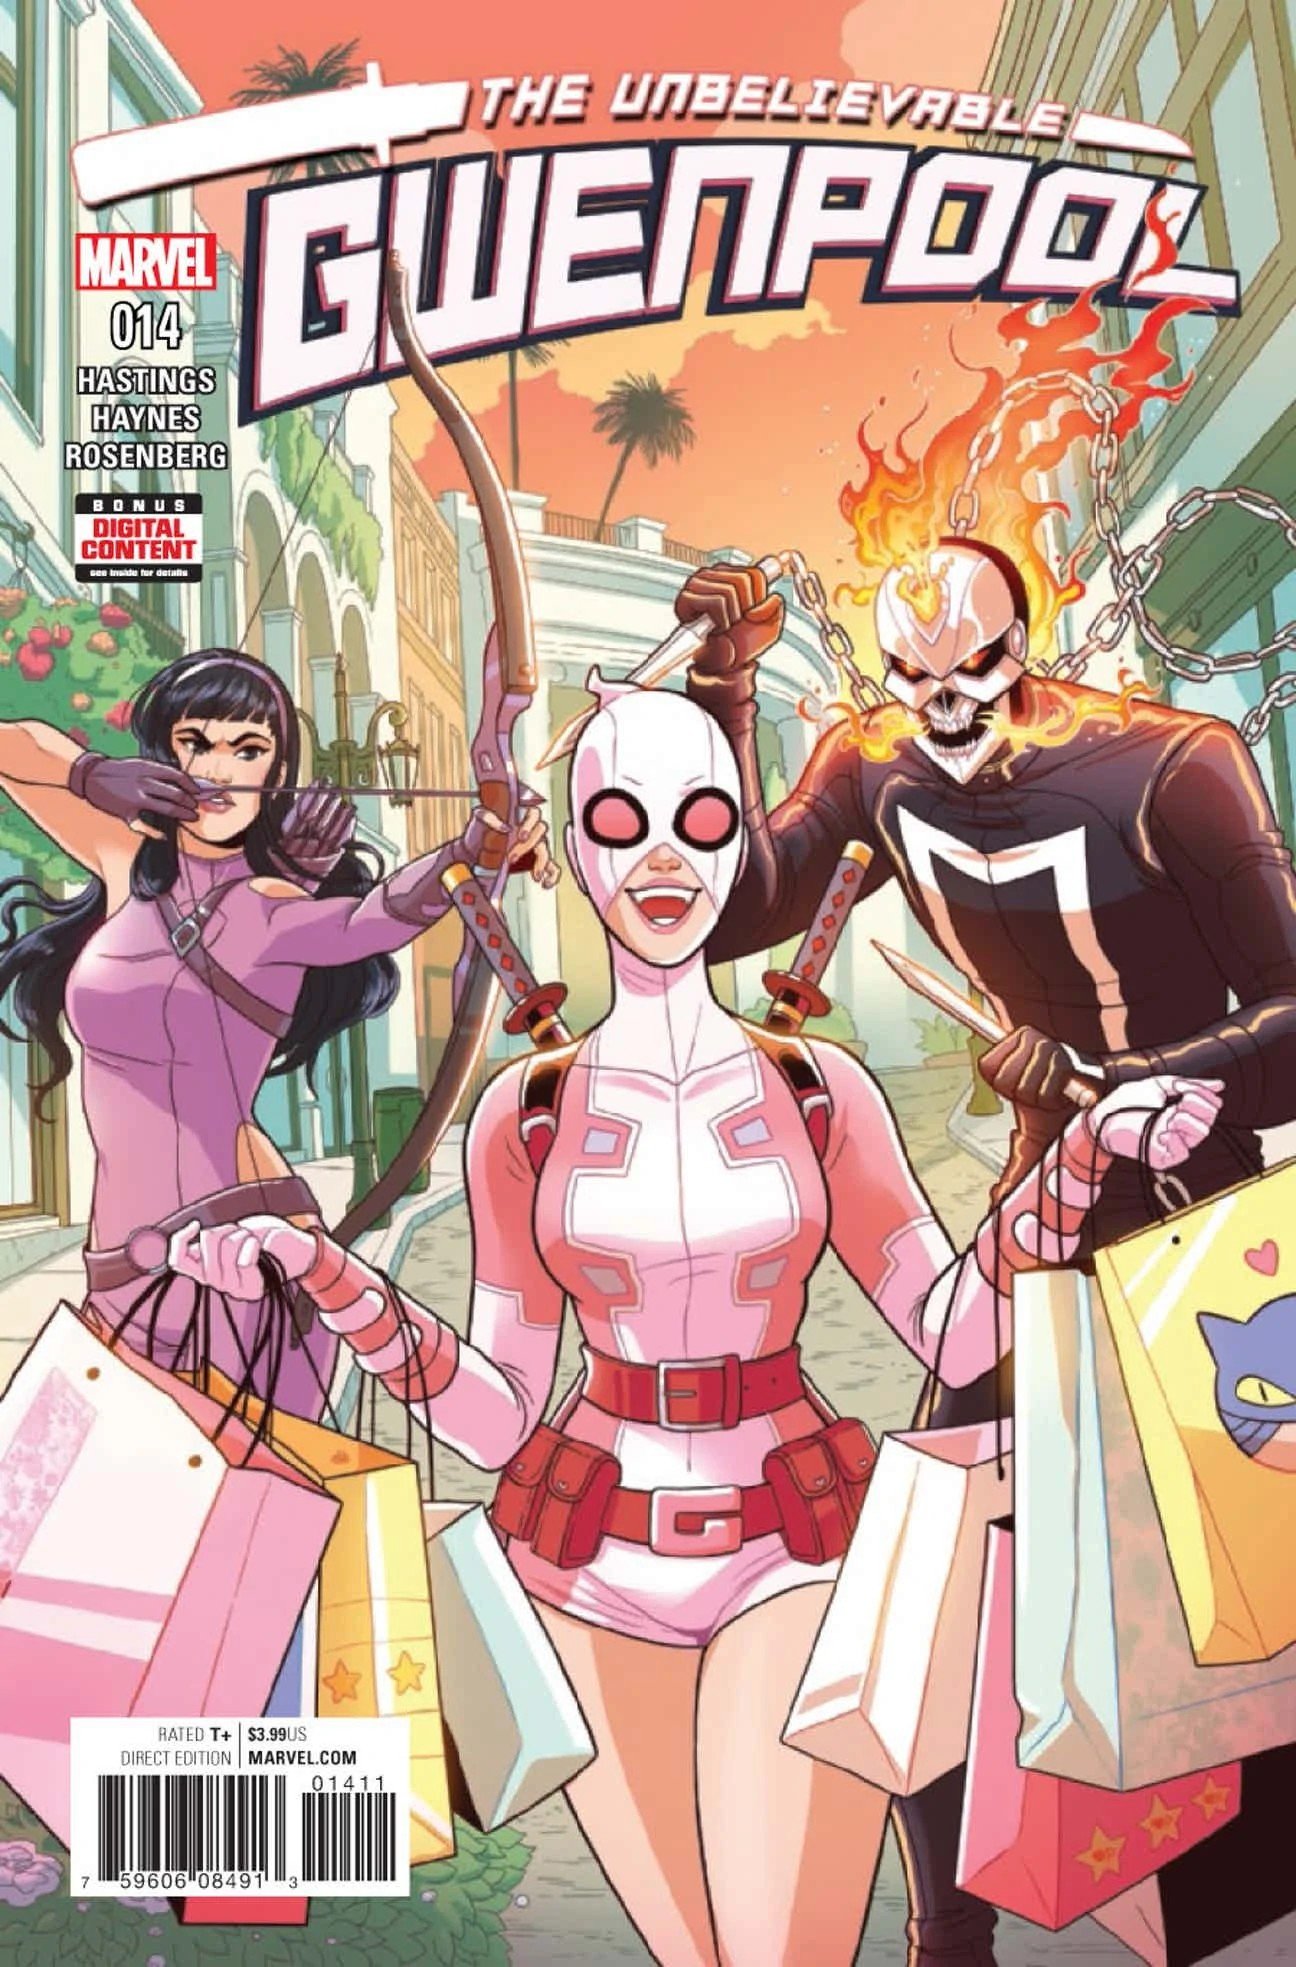 The Unbelievable Gwenpool (Comic Book) - TV Tropes